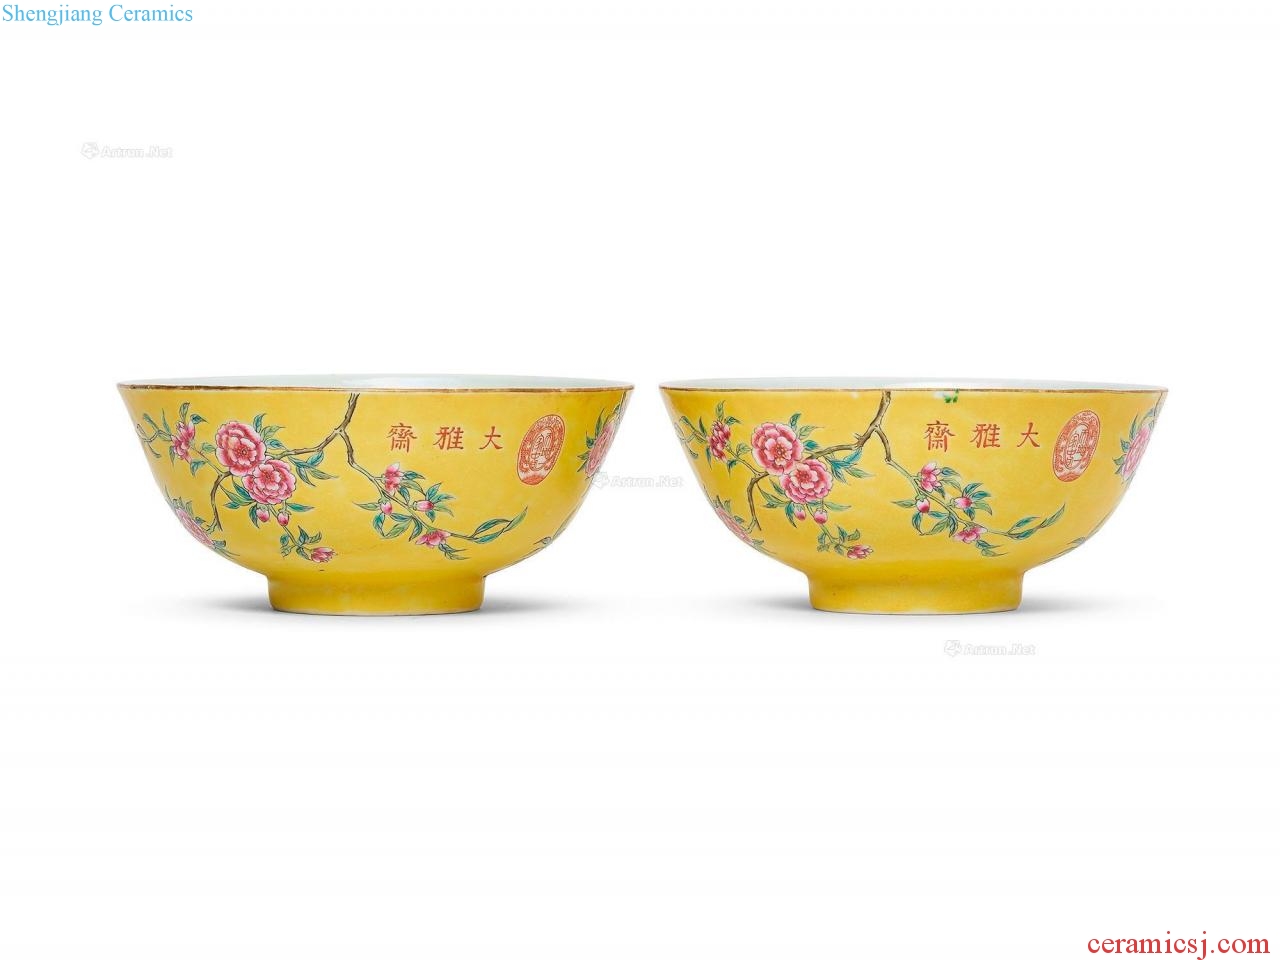 /yellow powder enamel Chinese rose patterns of the republic of China in late qing dynasty 盌 (a)